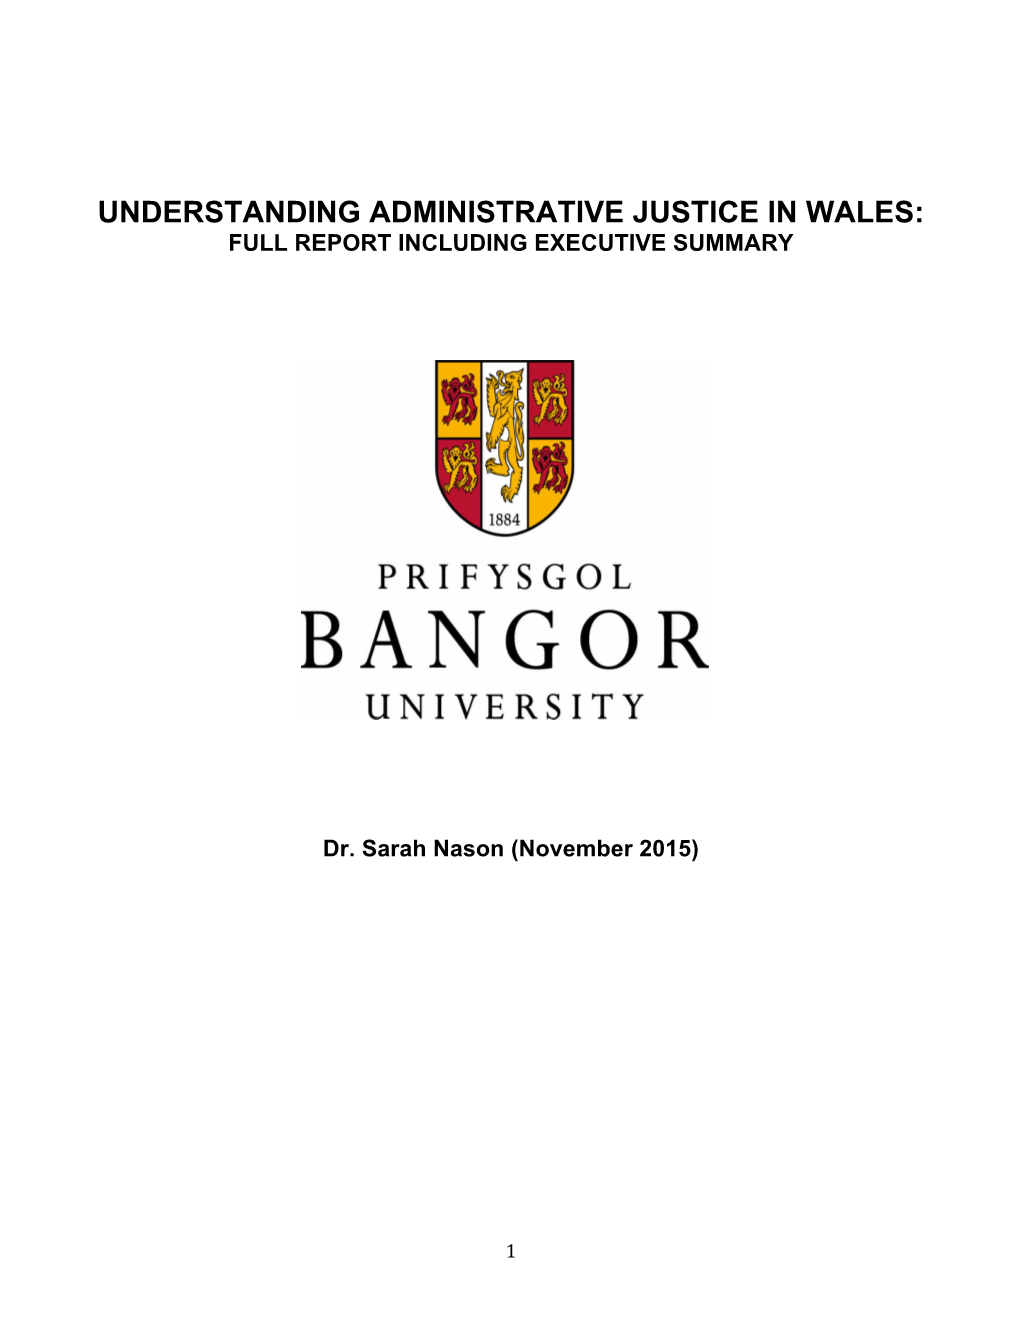 Understanding Administrative Justice in Wales: Full Report Including Executive Summary